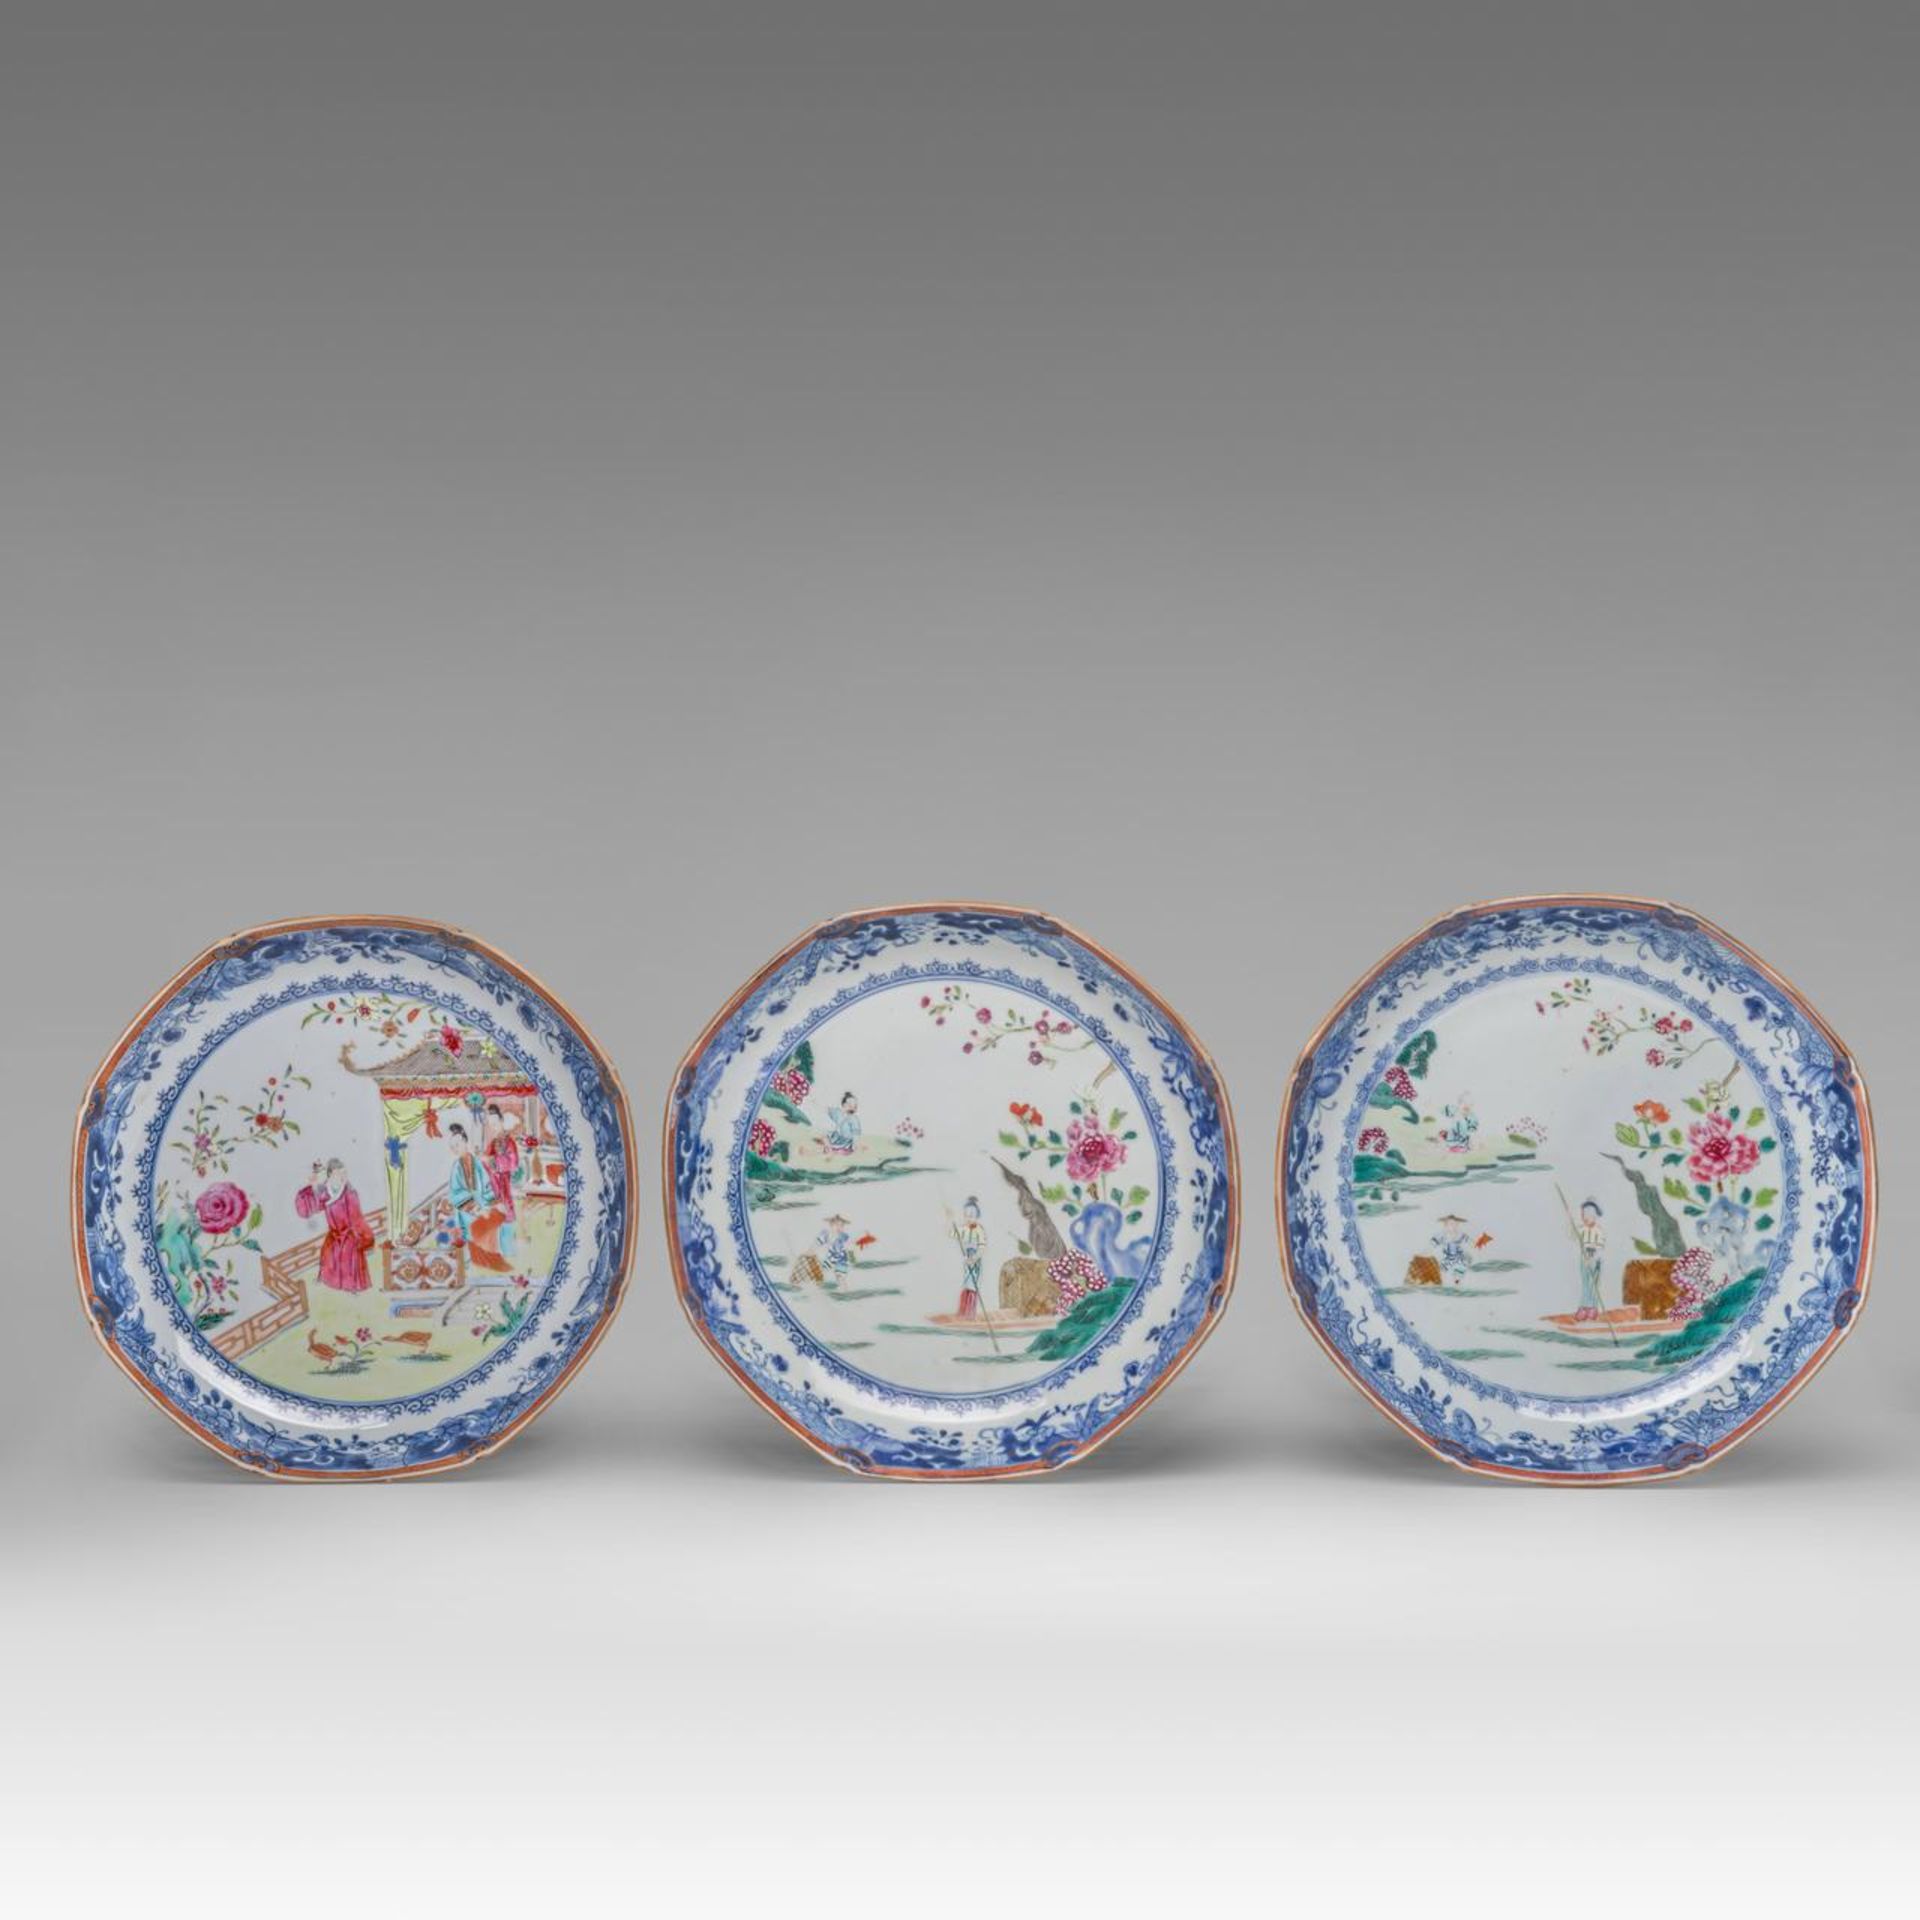 Three Chinese famille rose figural octagonal export porcelain plates, 18thC, dia 25 cm